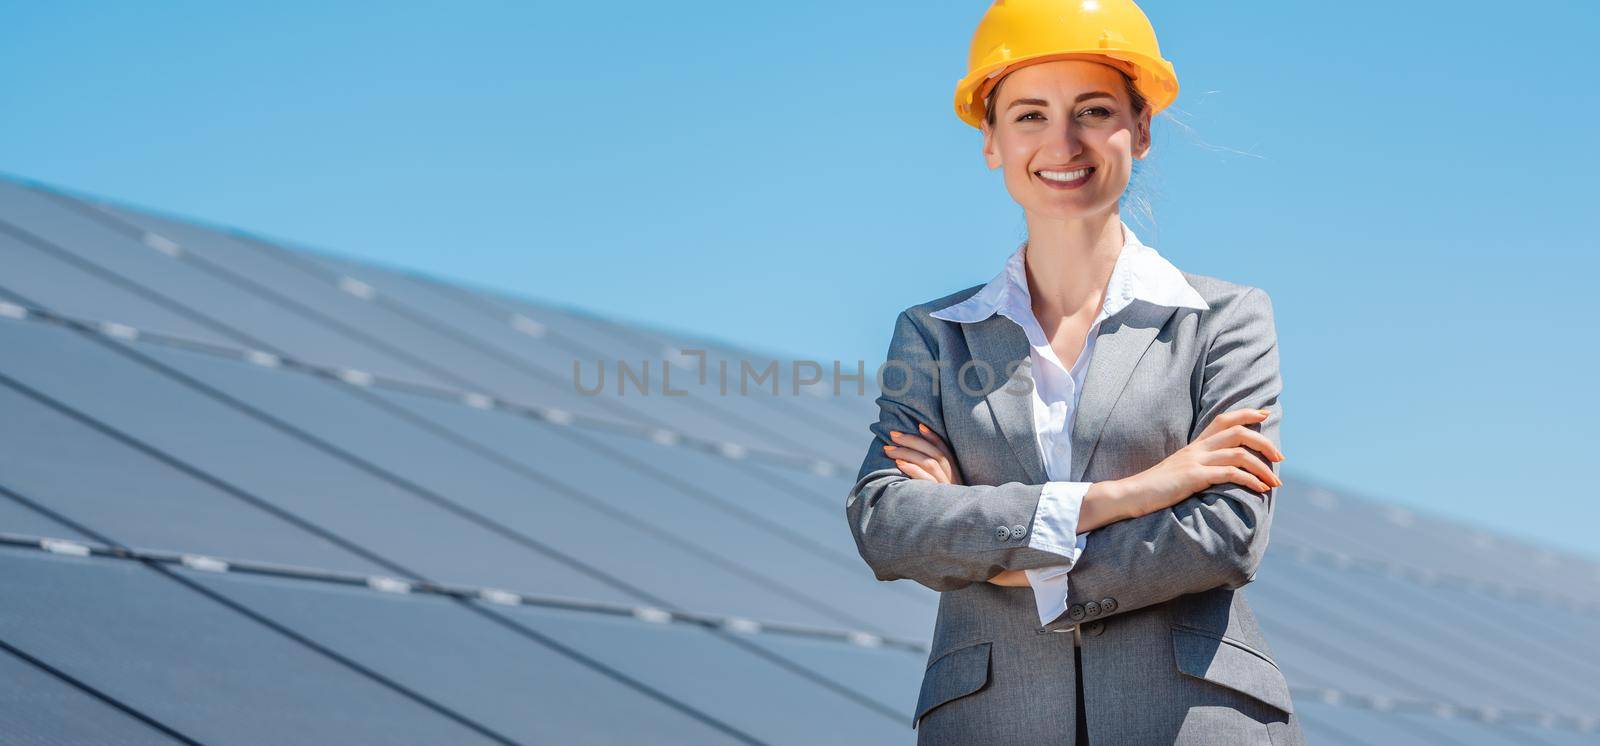 Woman investor in clean energy standing in front of solar panels by Kzenon